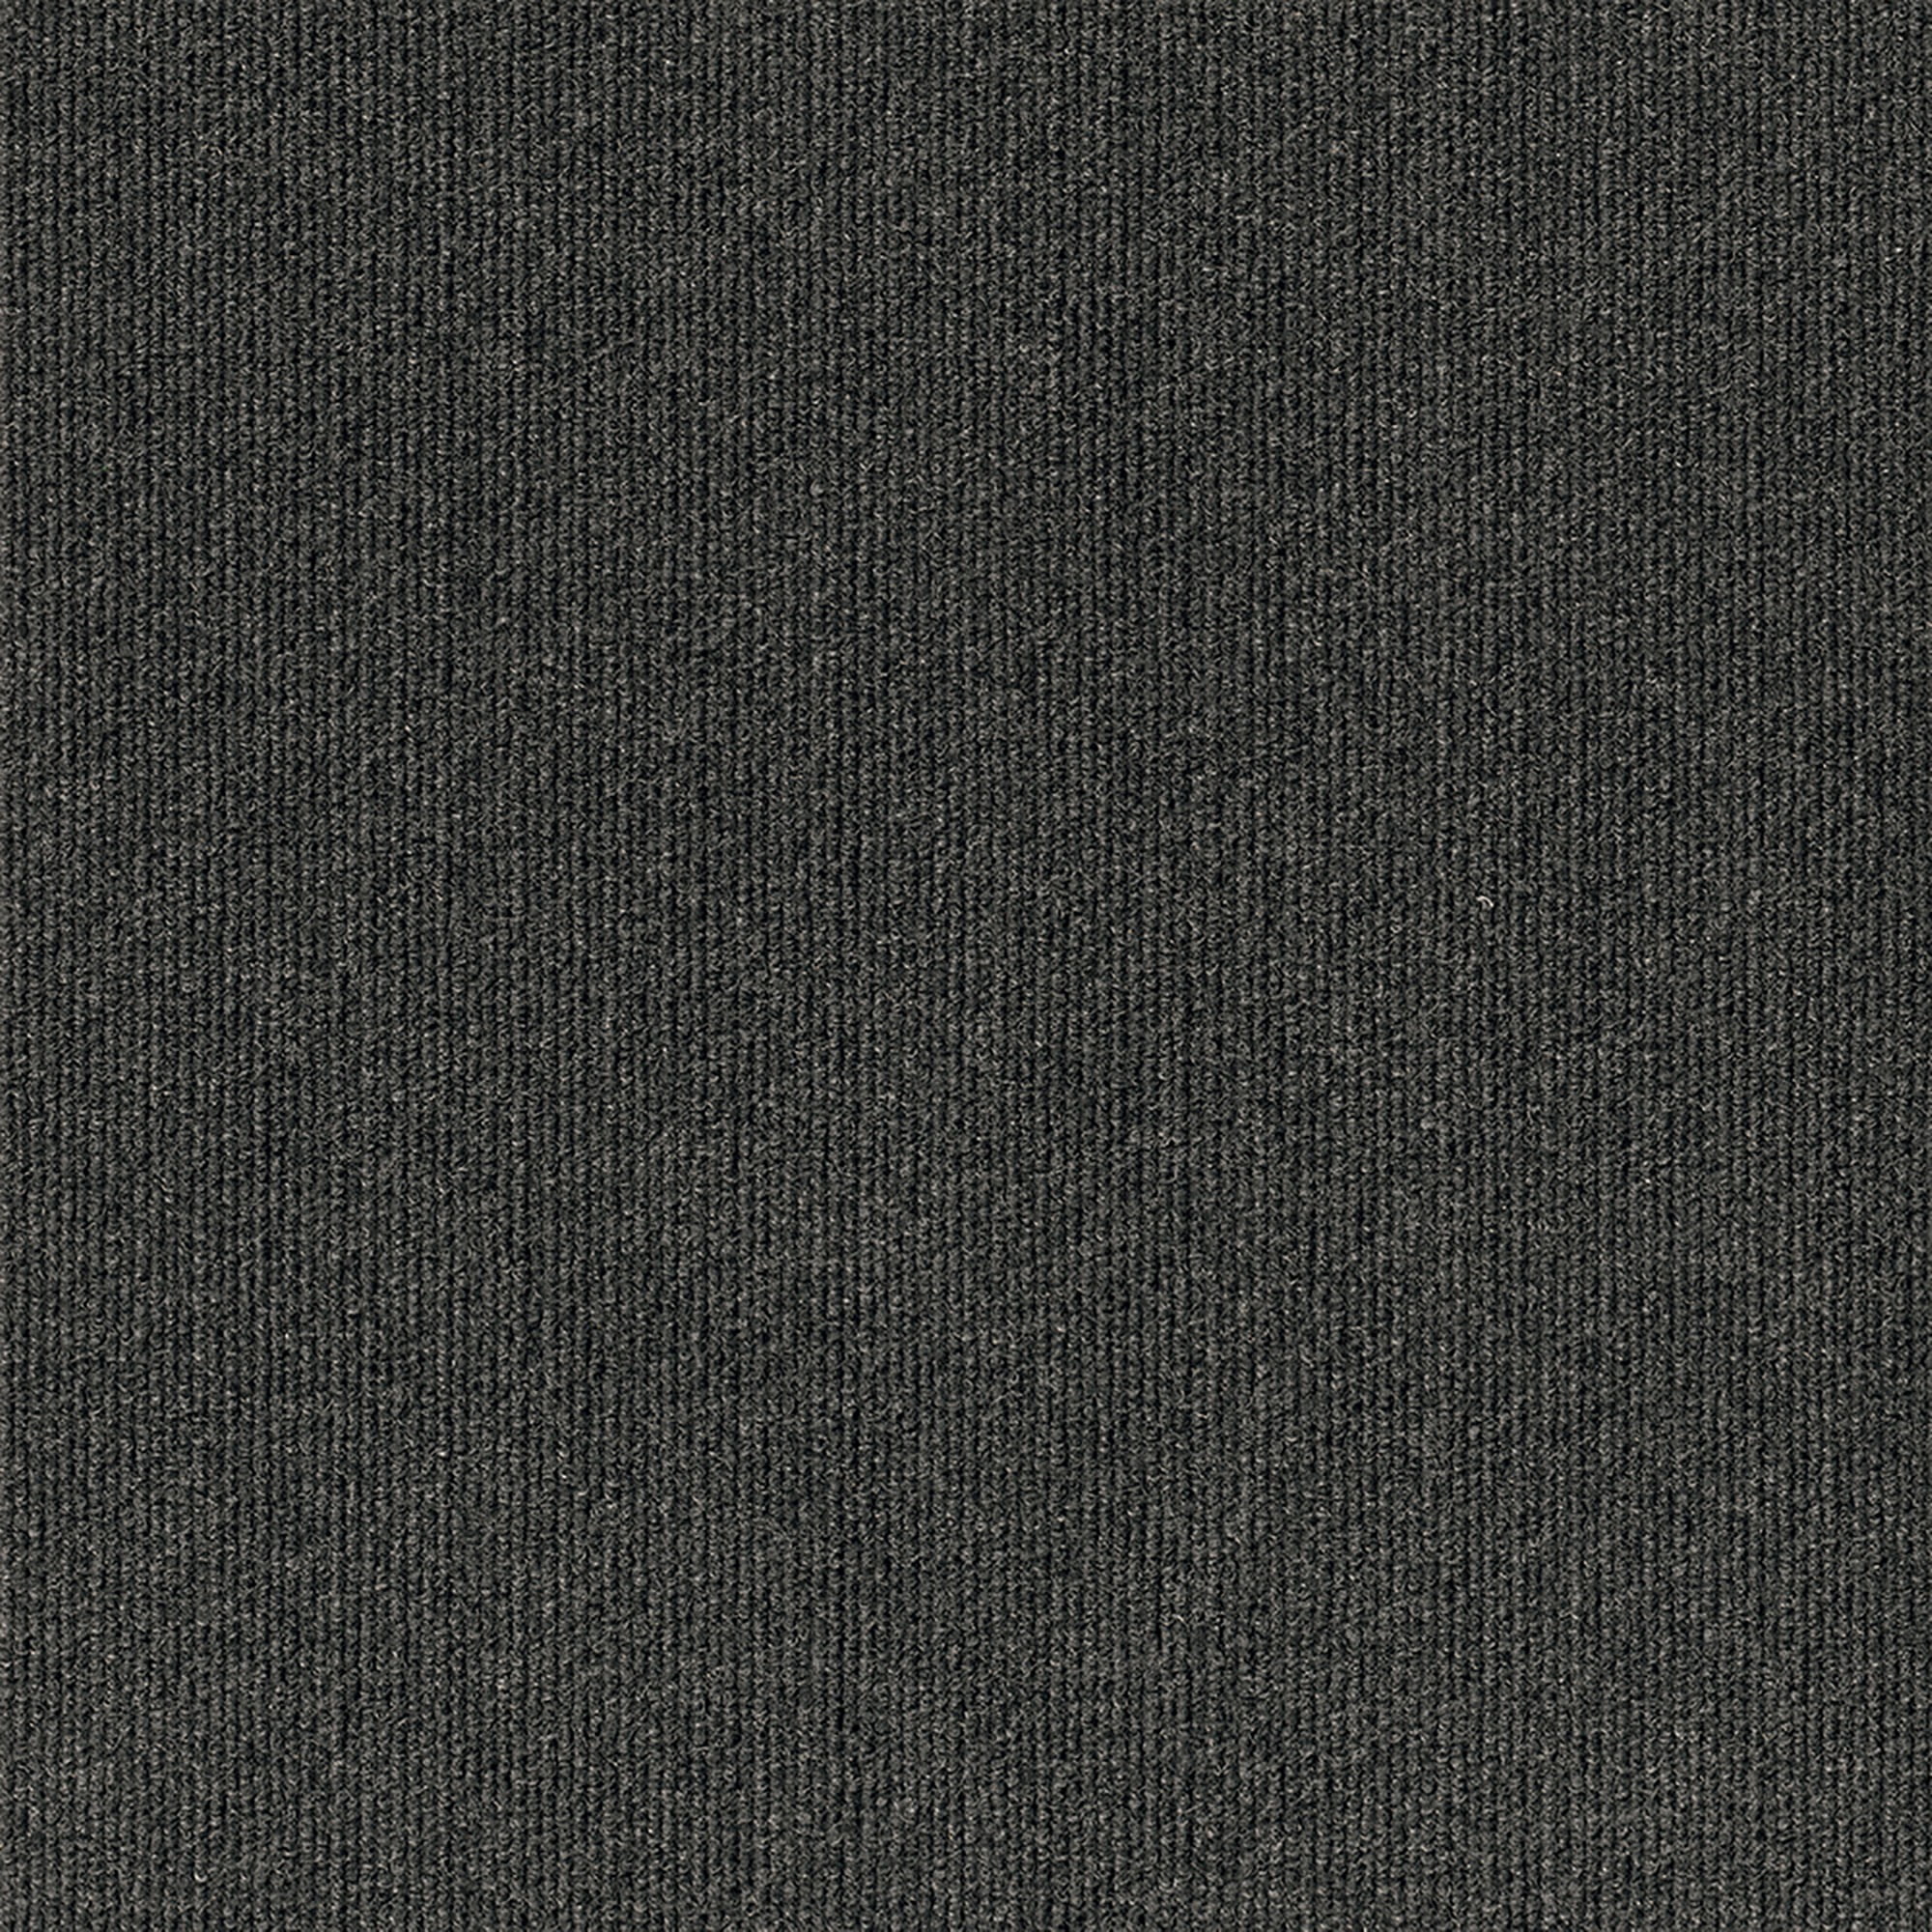 Interface Monochrome Pacific Blue Carpet Tiles Ideal For Shed Or Garage 